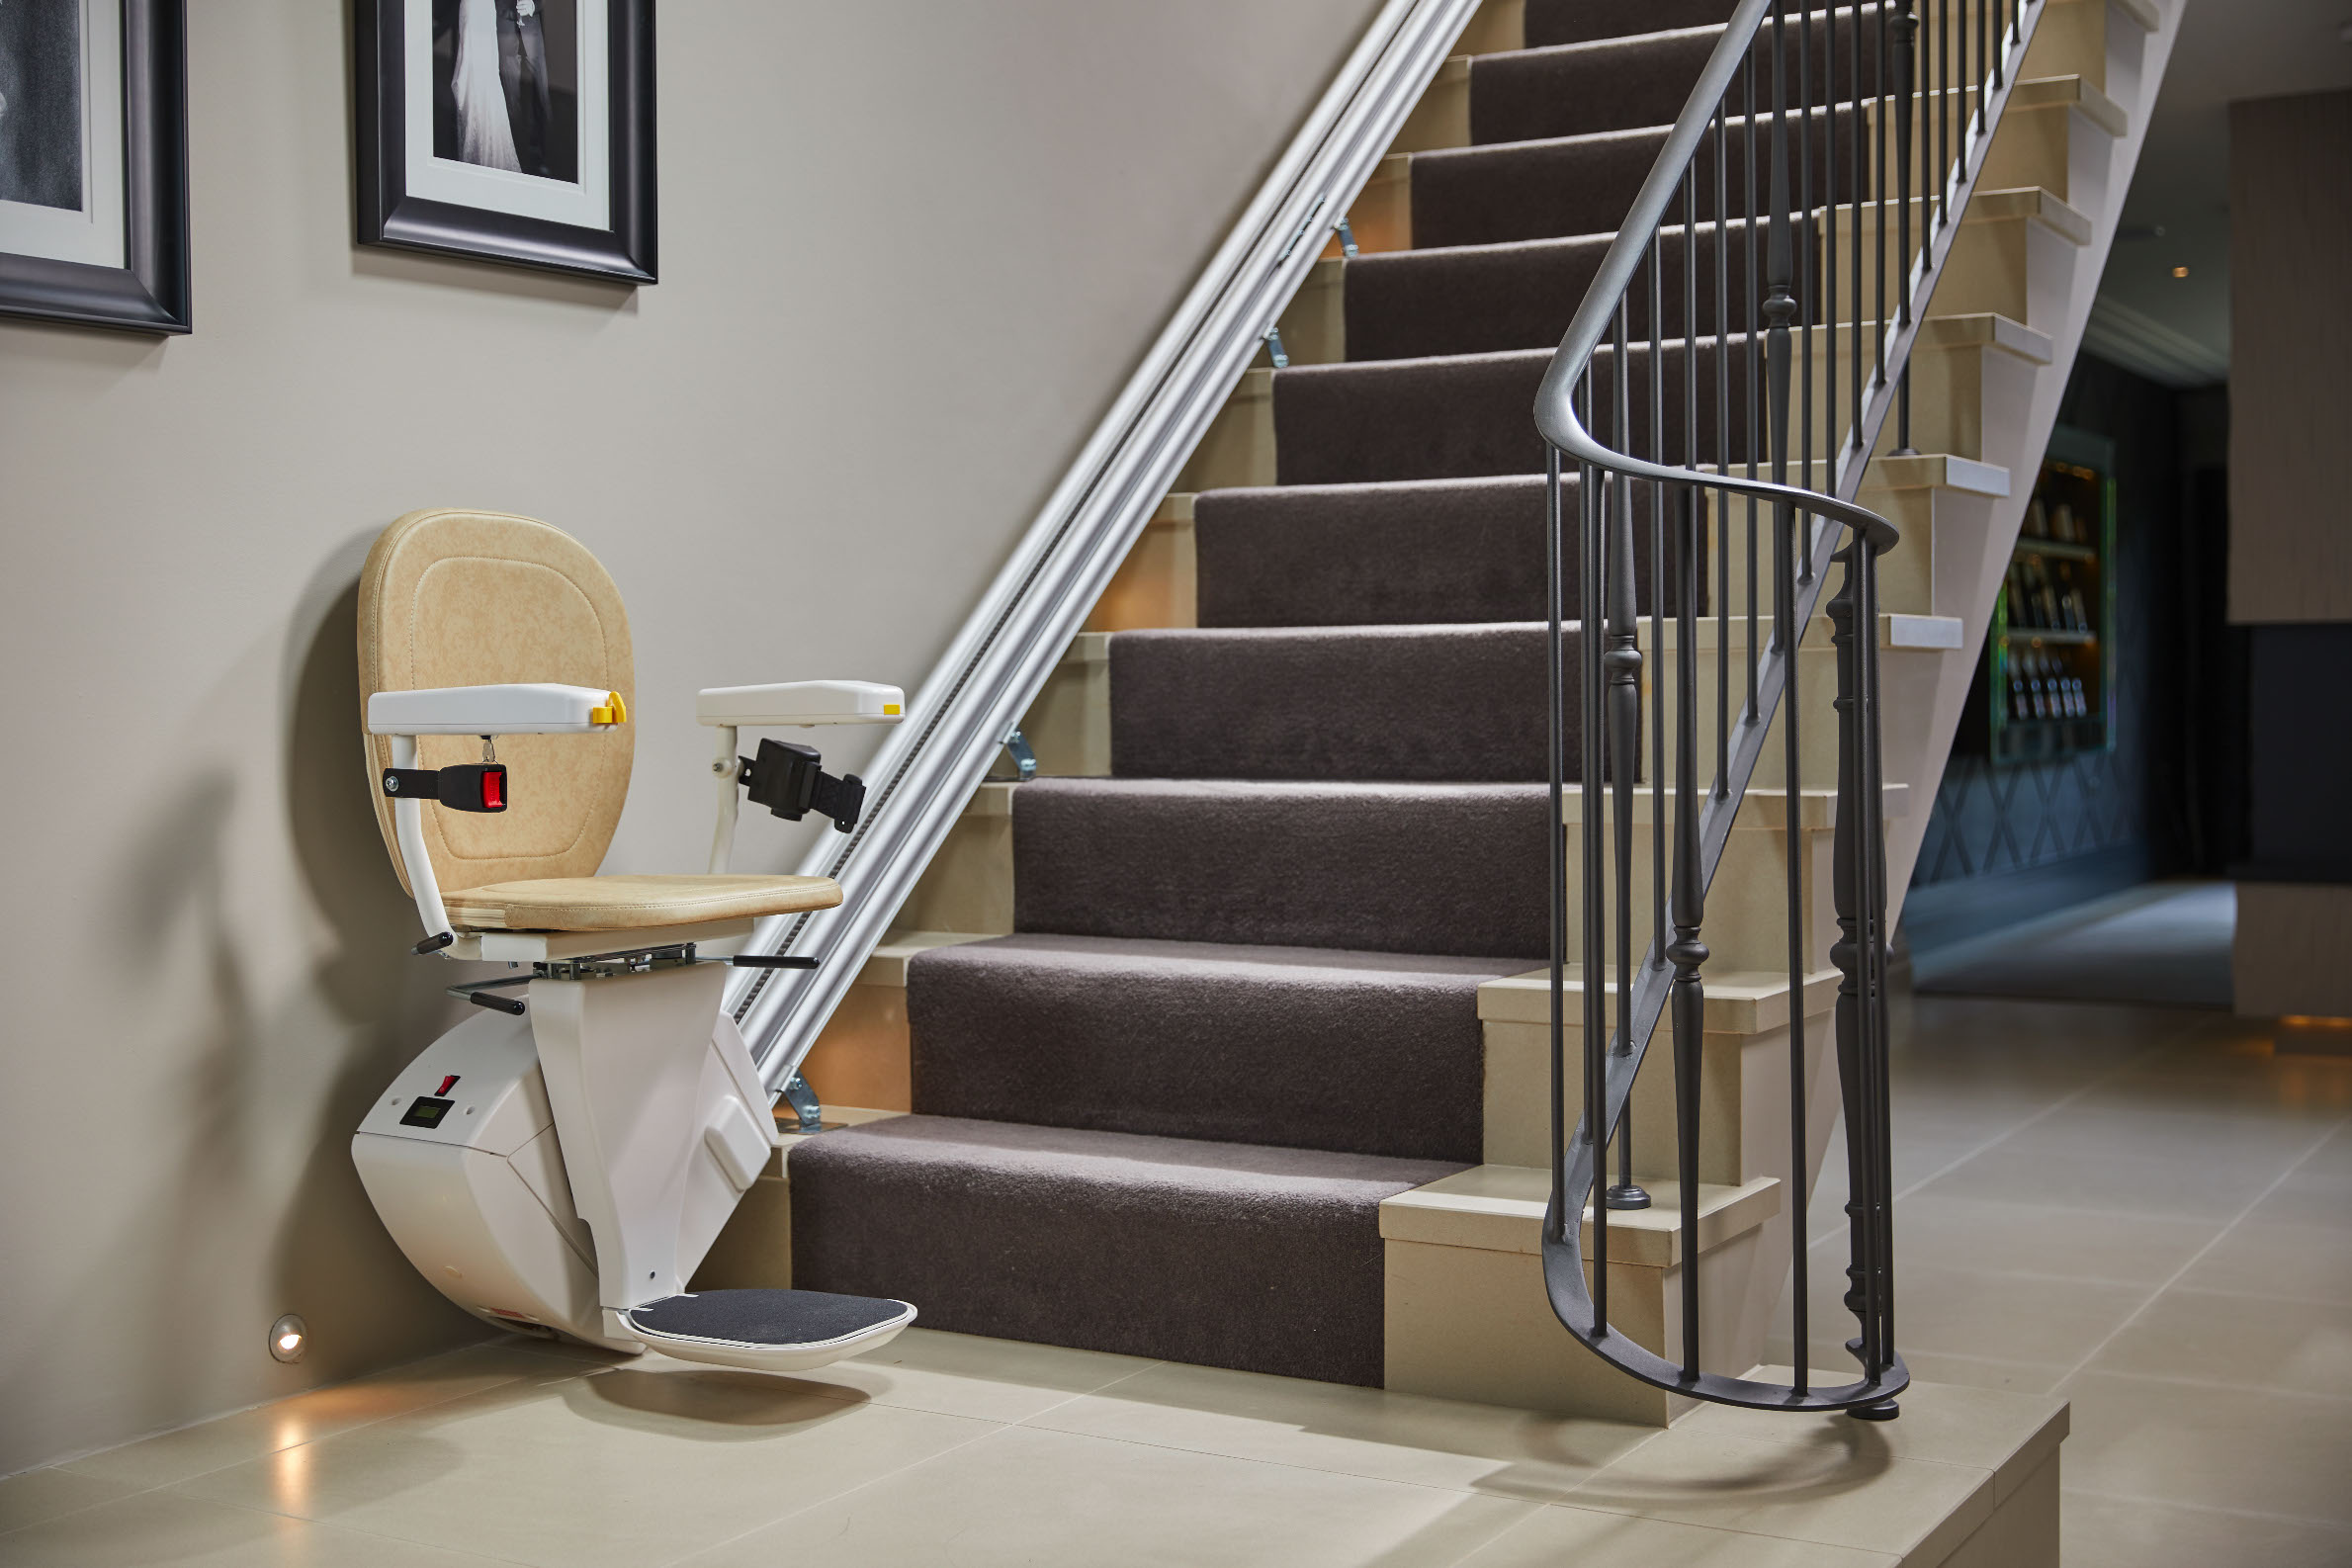 Home Lifts vs. Stairlifts: Which Option Is Right for You